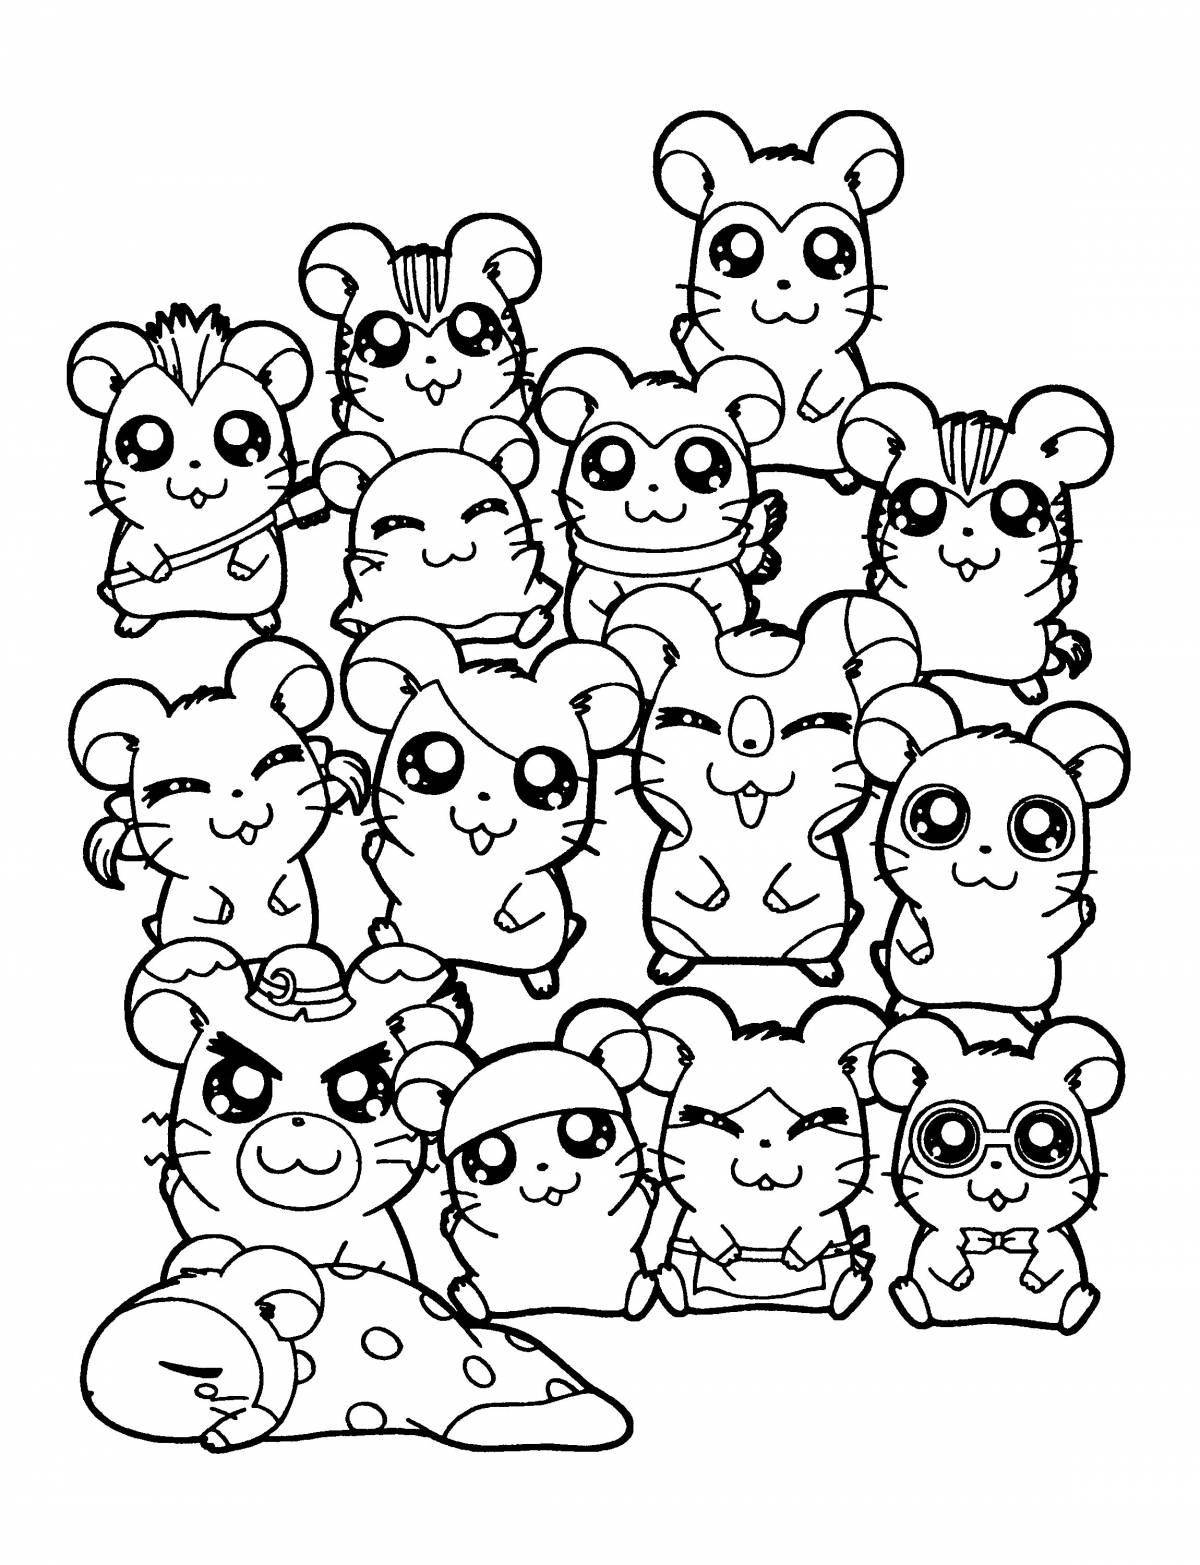 Adorable hamster coloring book